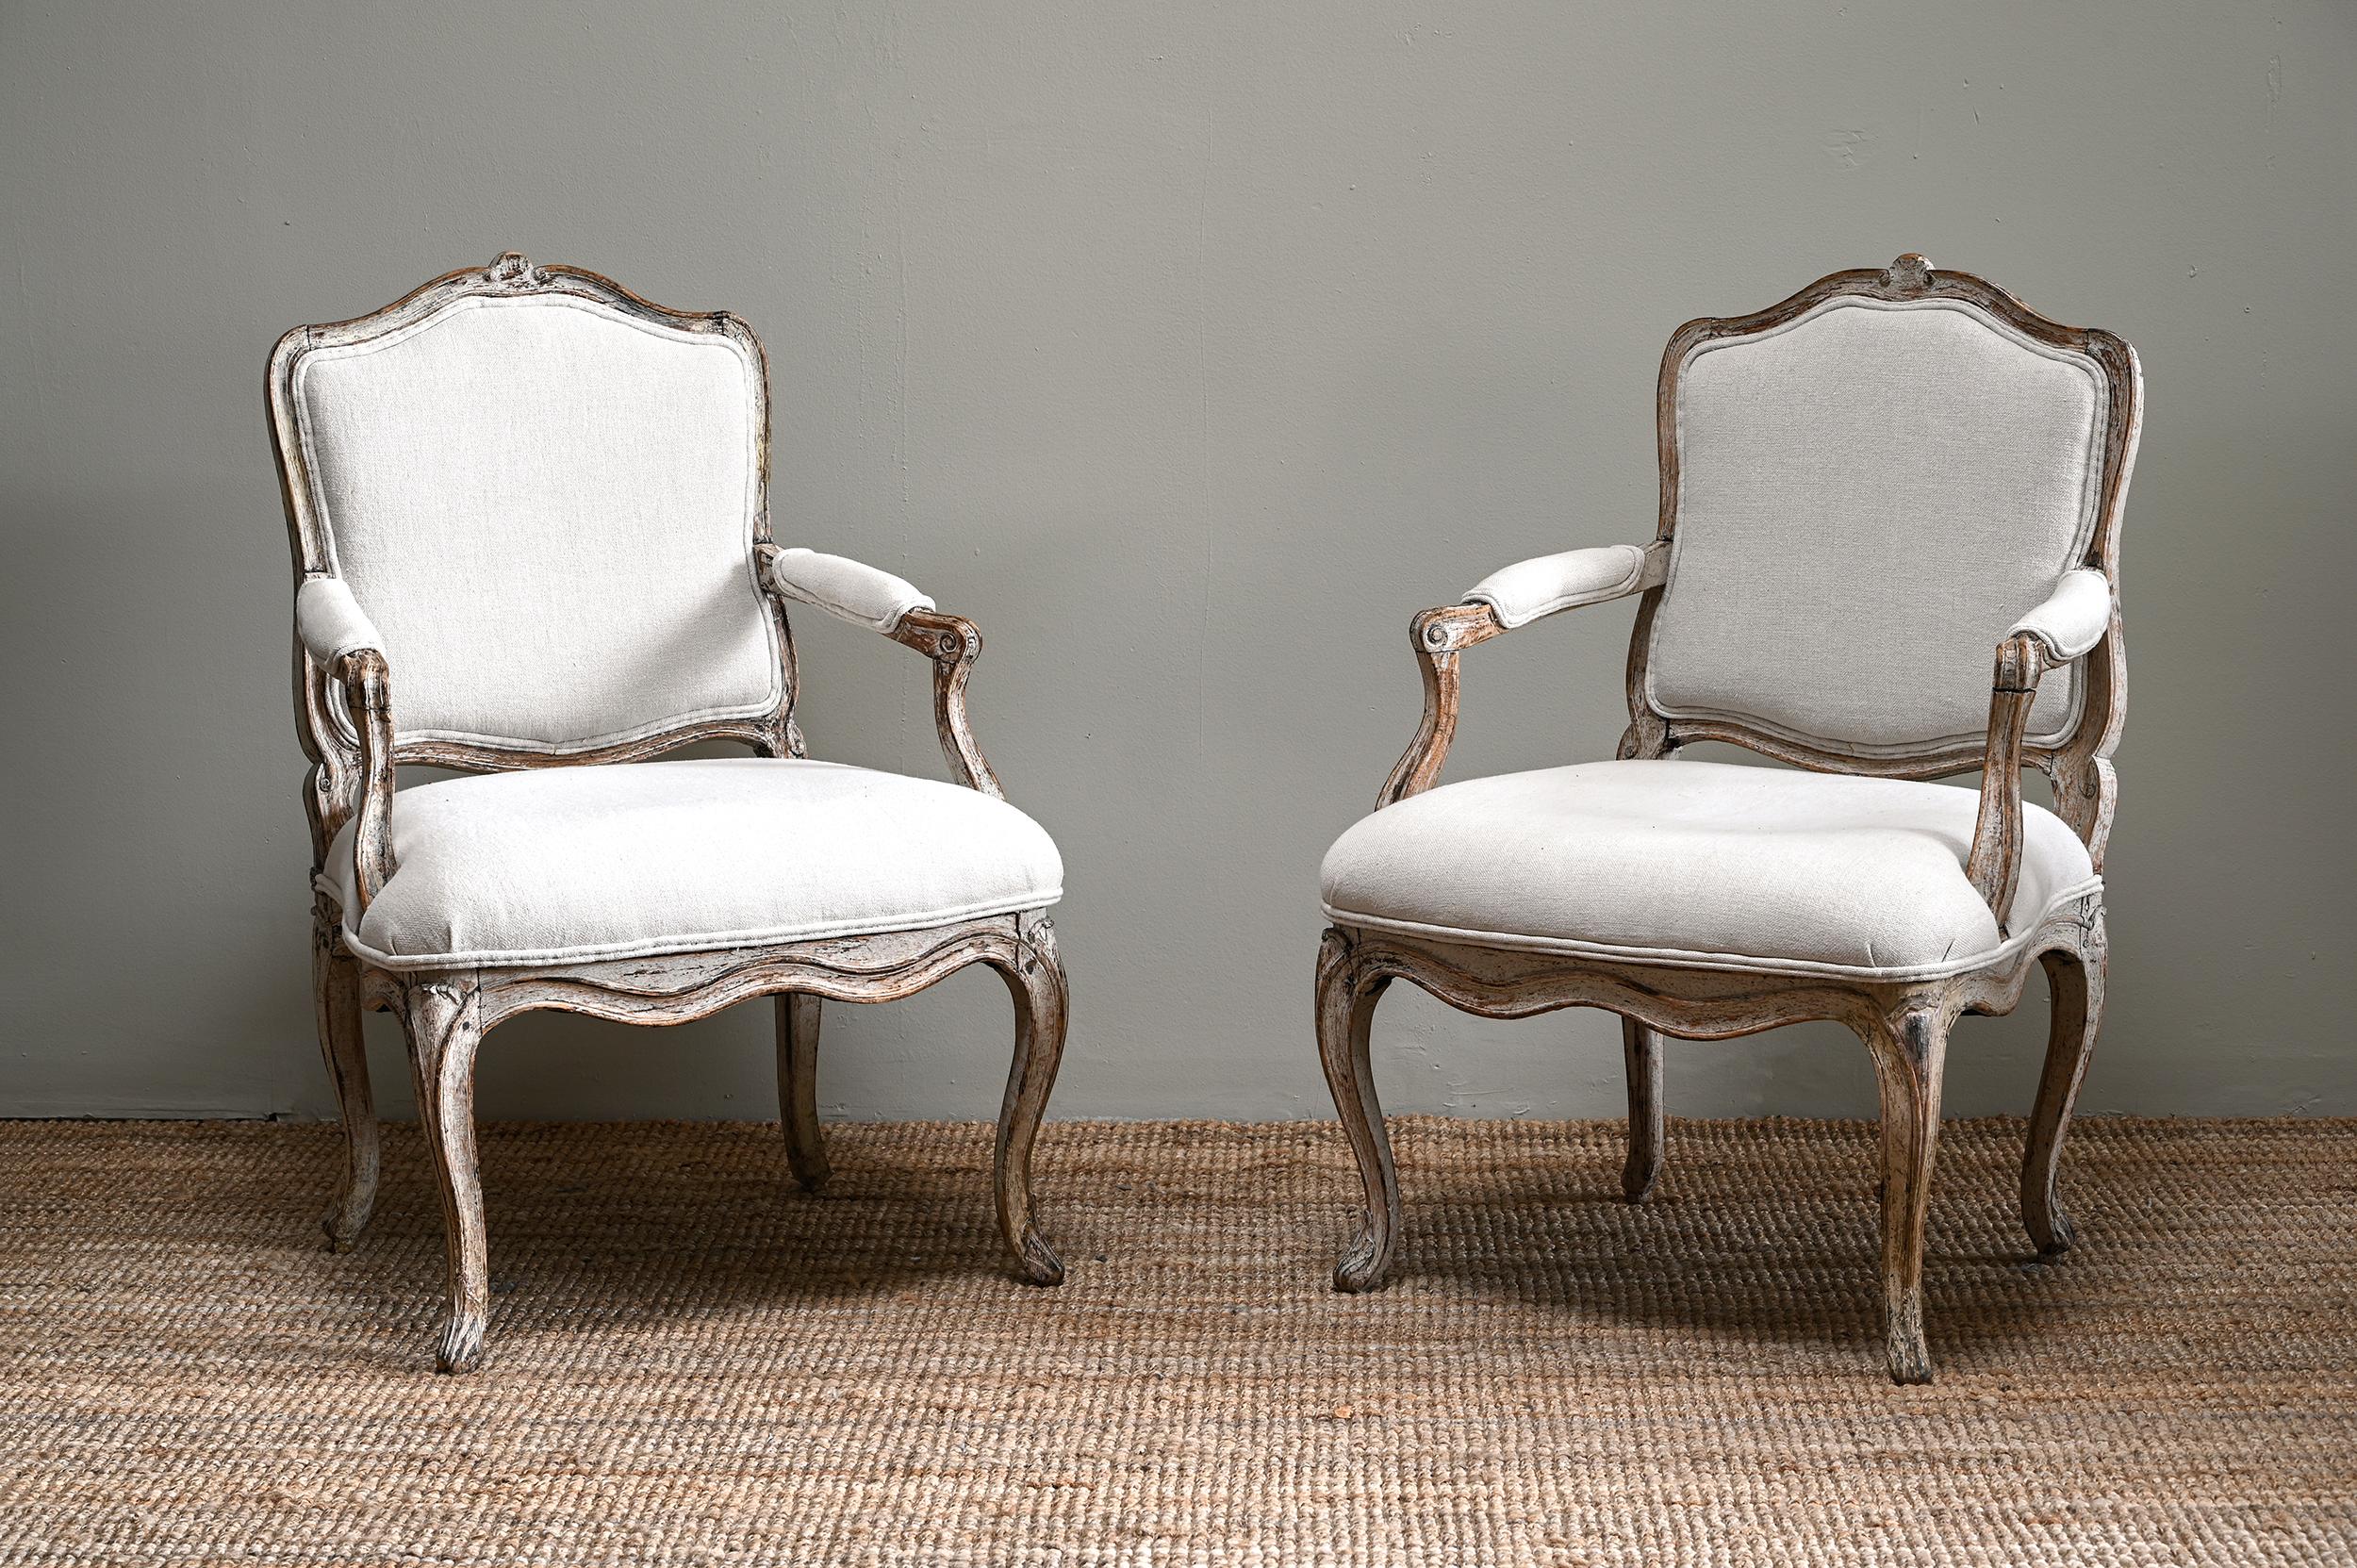 Fine pair of 18th century French Rococo armchairs with great proportions and in their original finish with good patination. Newly upholstered. Ca 1750 France.